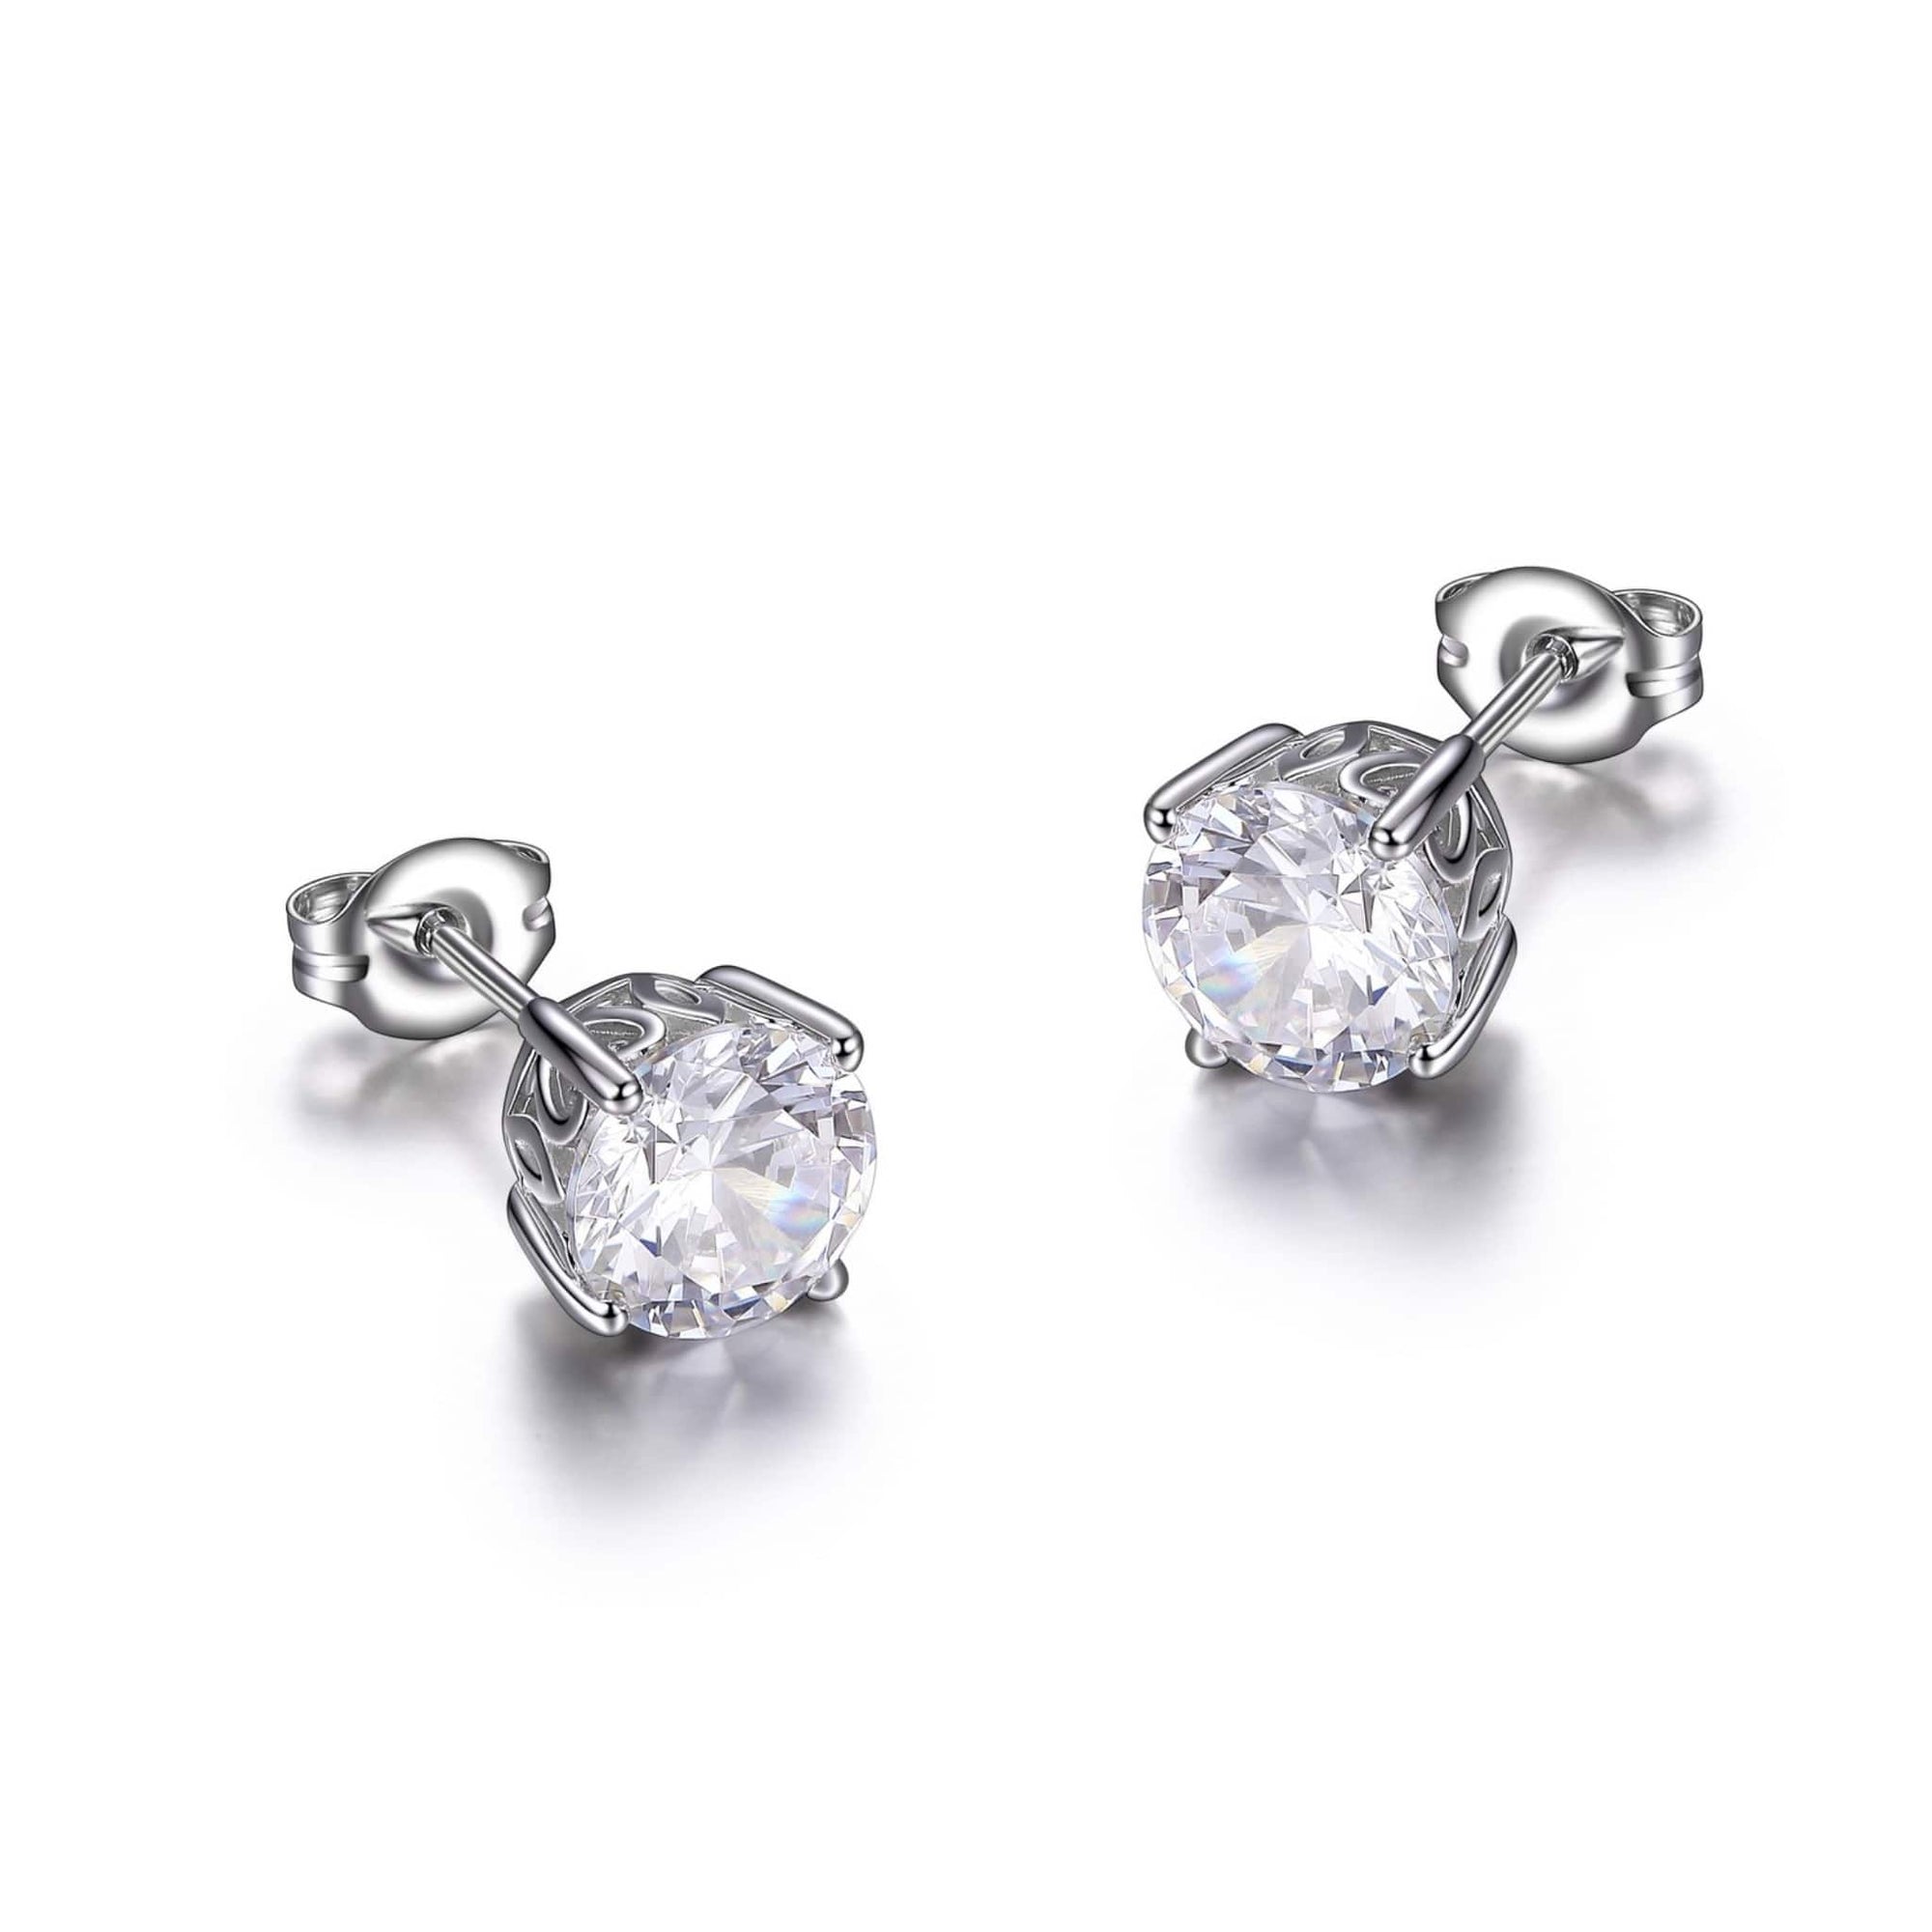 7mm Round CZ Silver Stud Earrings at Arman's Jewellers